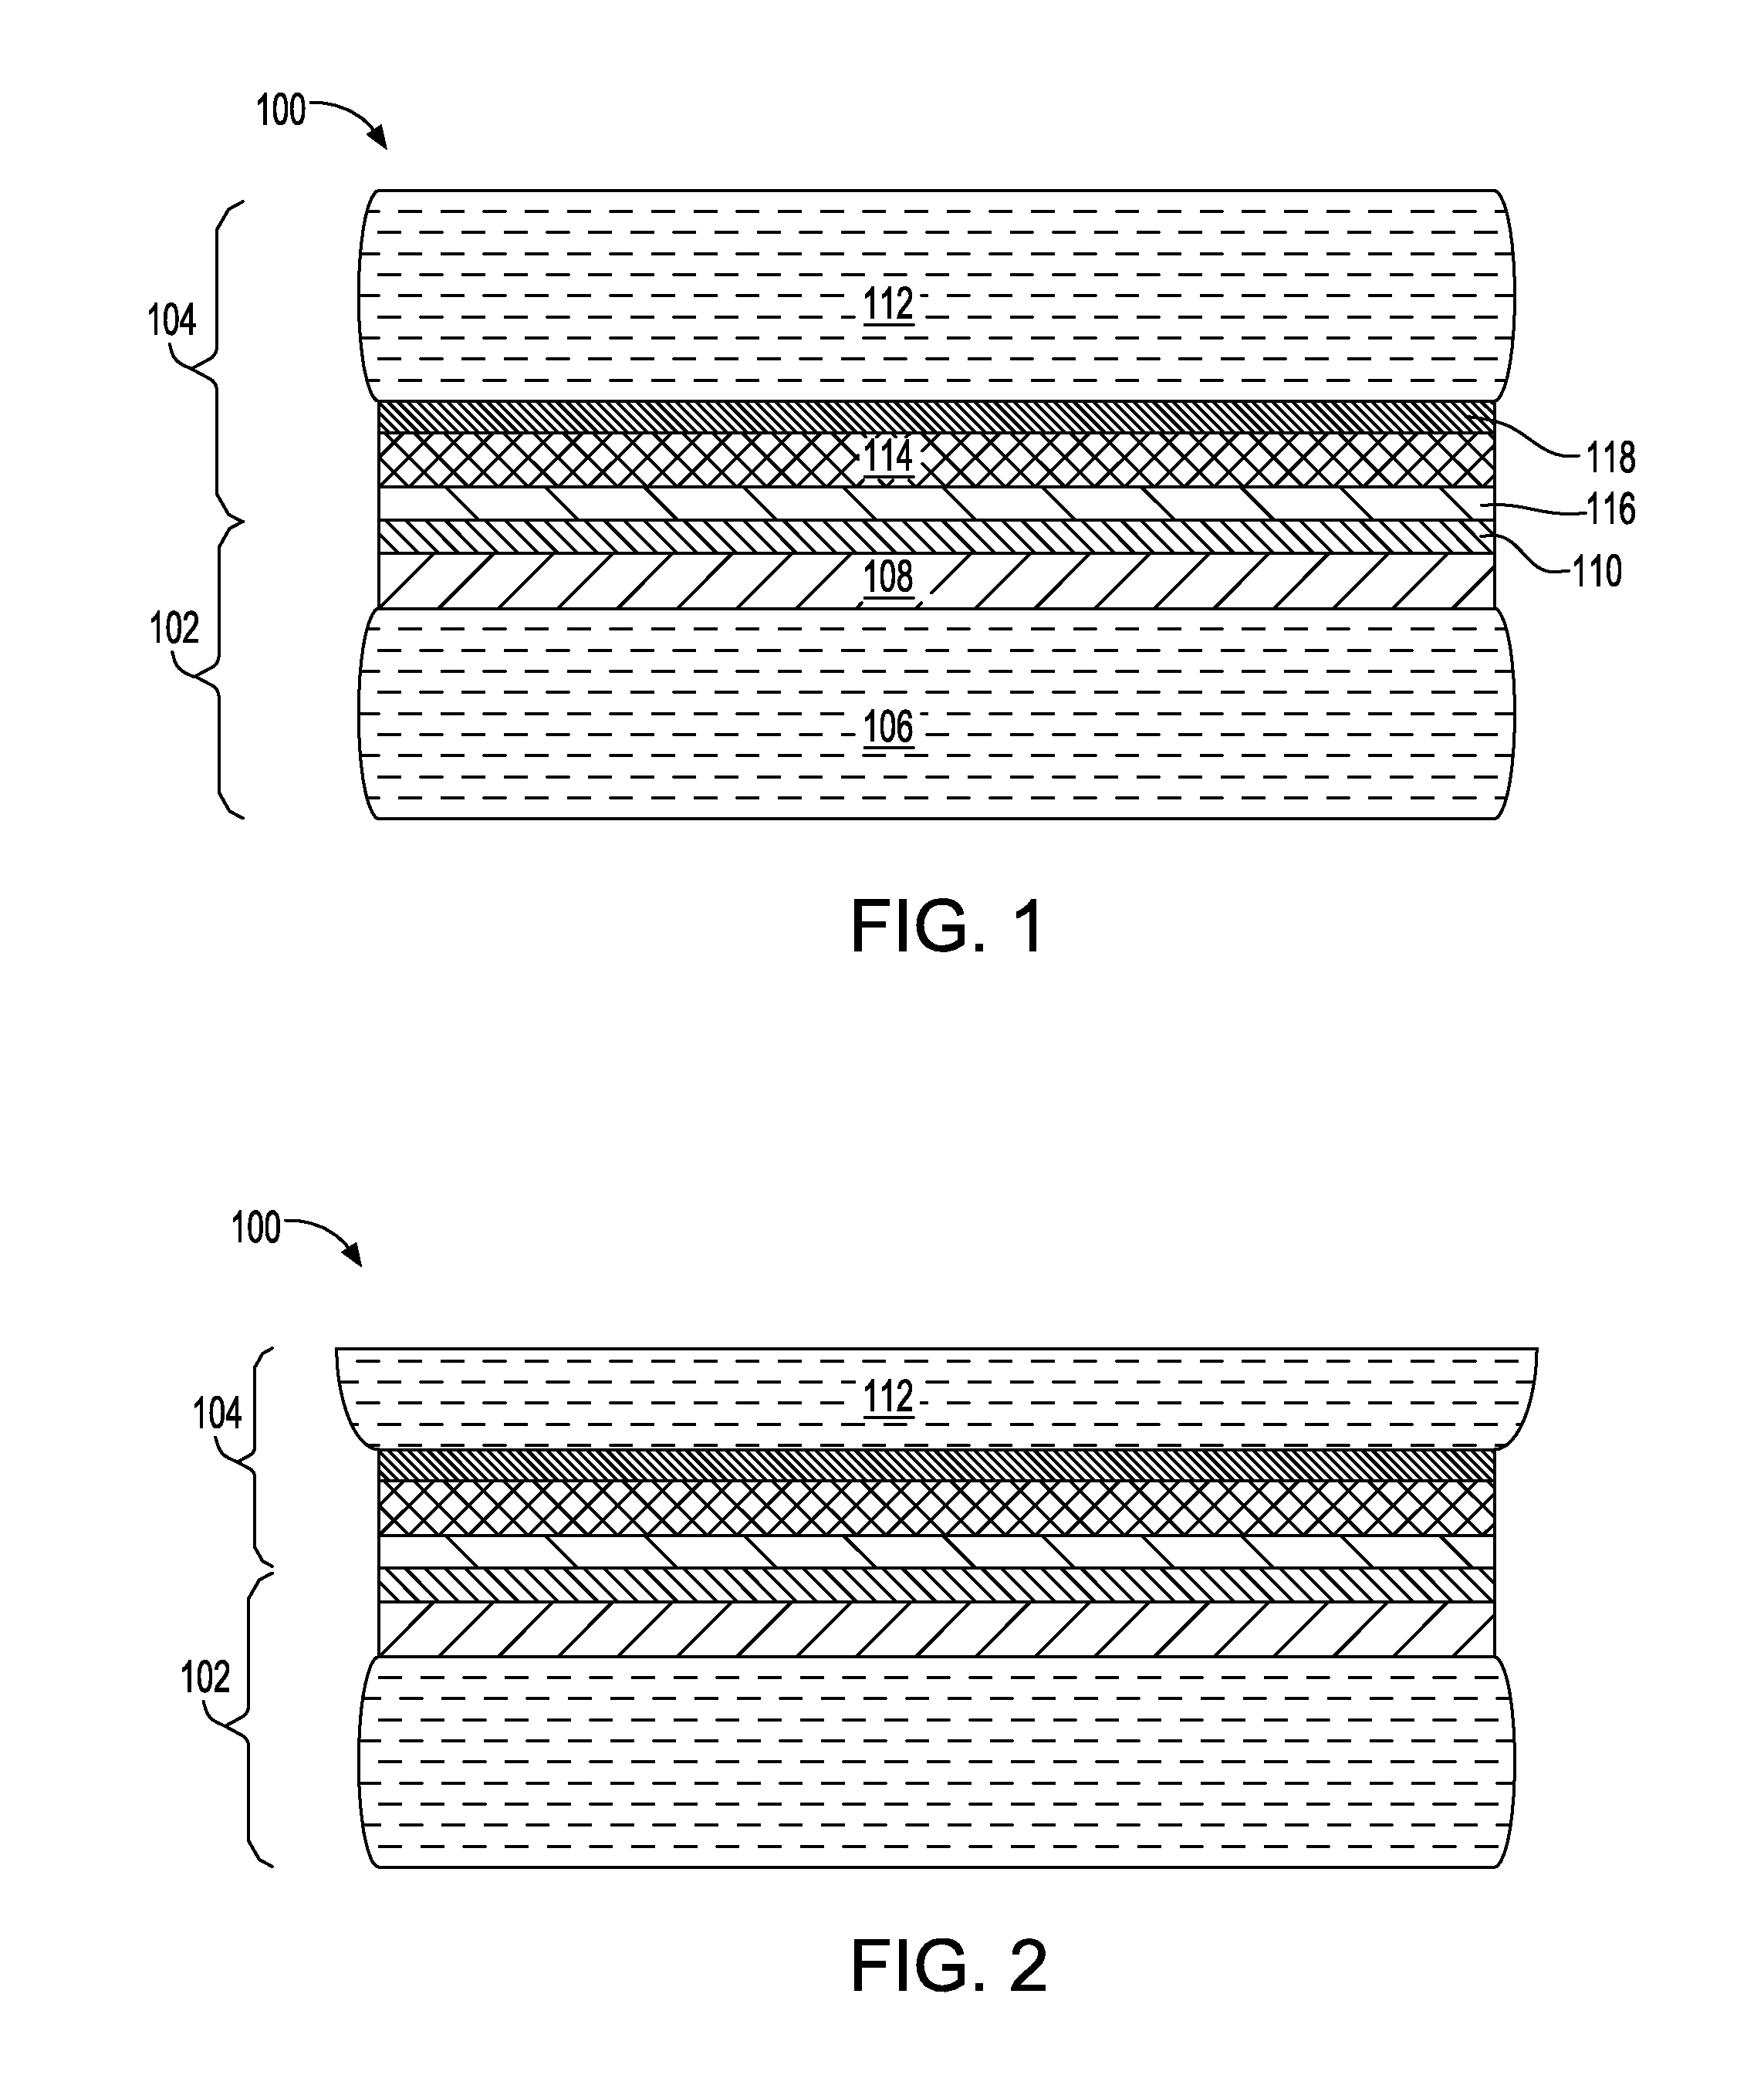 Edge protection of bonded wafers during wafer thinning